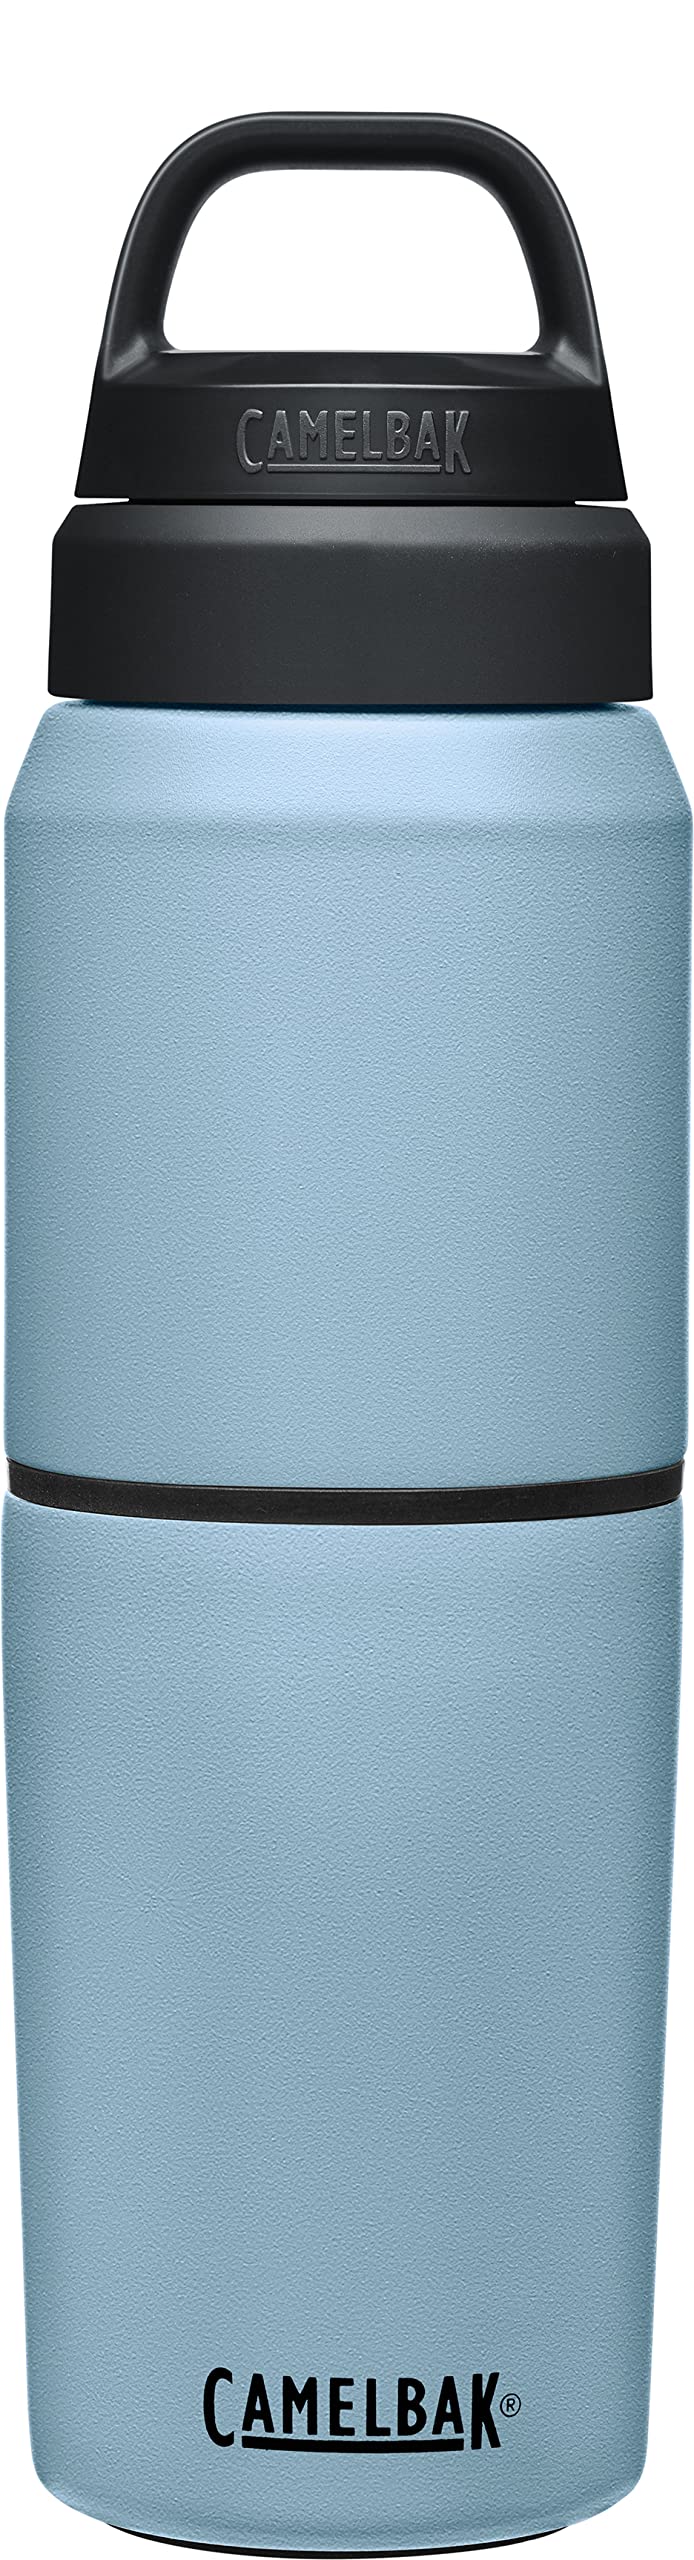 17-Oz Camelbak MultiBev Insulated Stainless Steel Bottle & Travel Cup (Dusk Blue) $18.04 + Free Shipping w/ Prime or on $35+